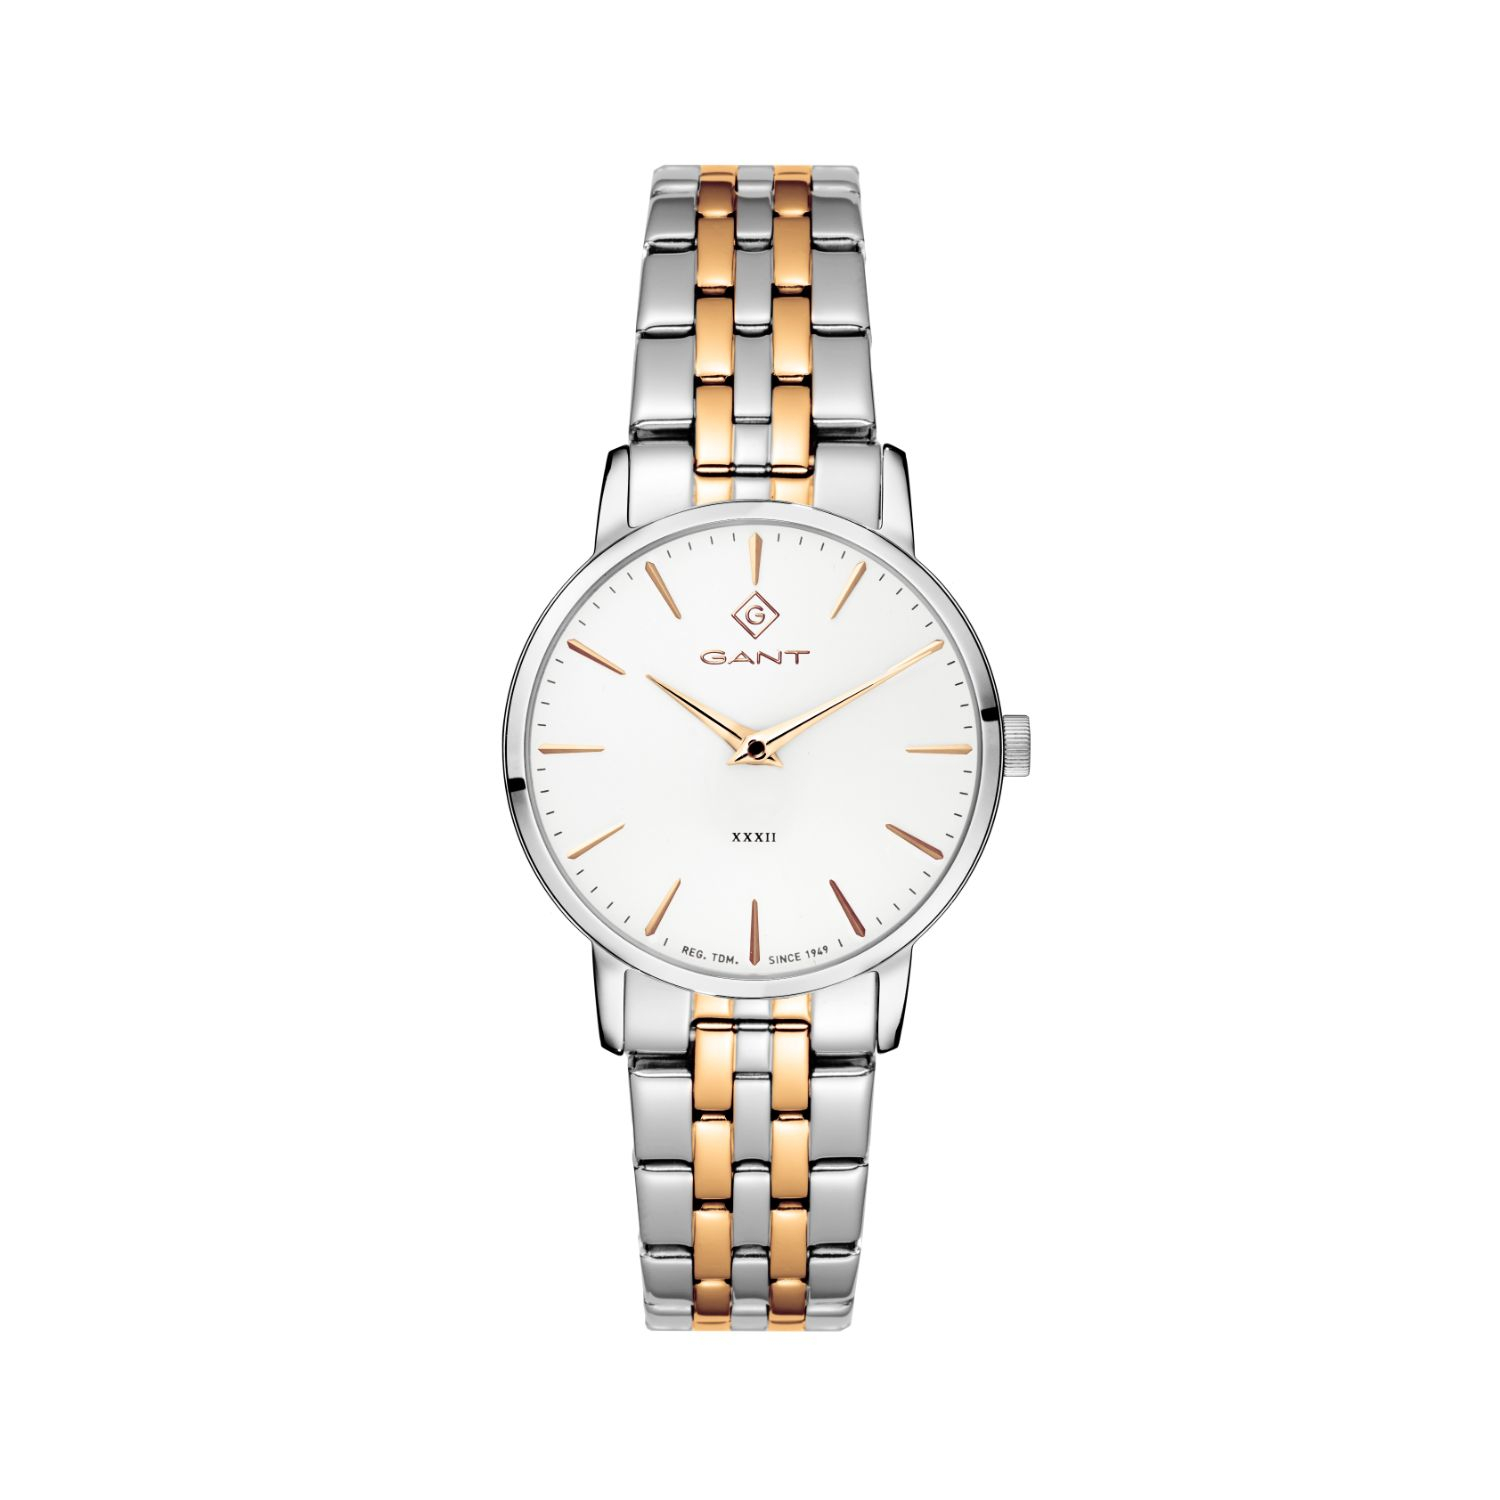 Womens Gant stainless steel watch with white dial and two-tone bracelet.